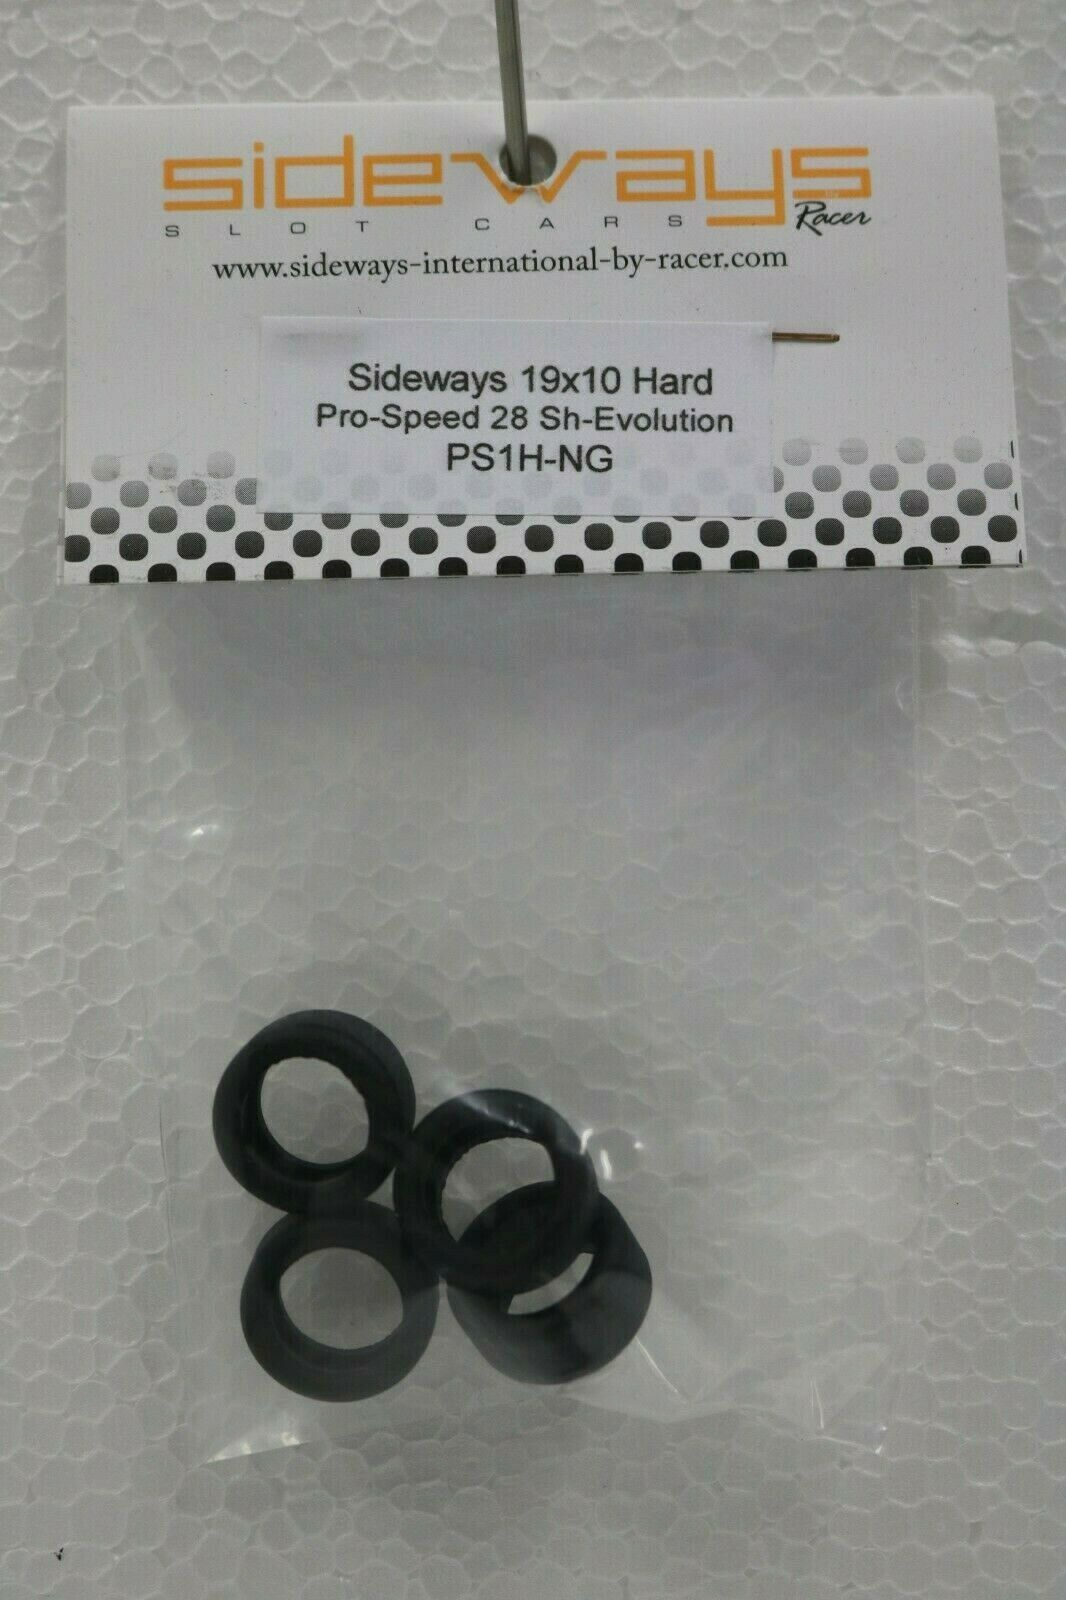 Sideways Ps1h-ng Pro Speed Hard Rubber Tires 19x10mm 28 Shore 1/32 Slot Car Part